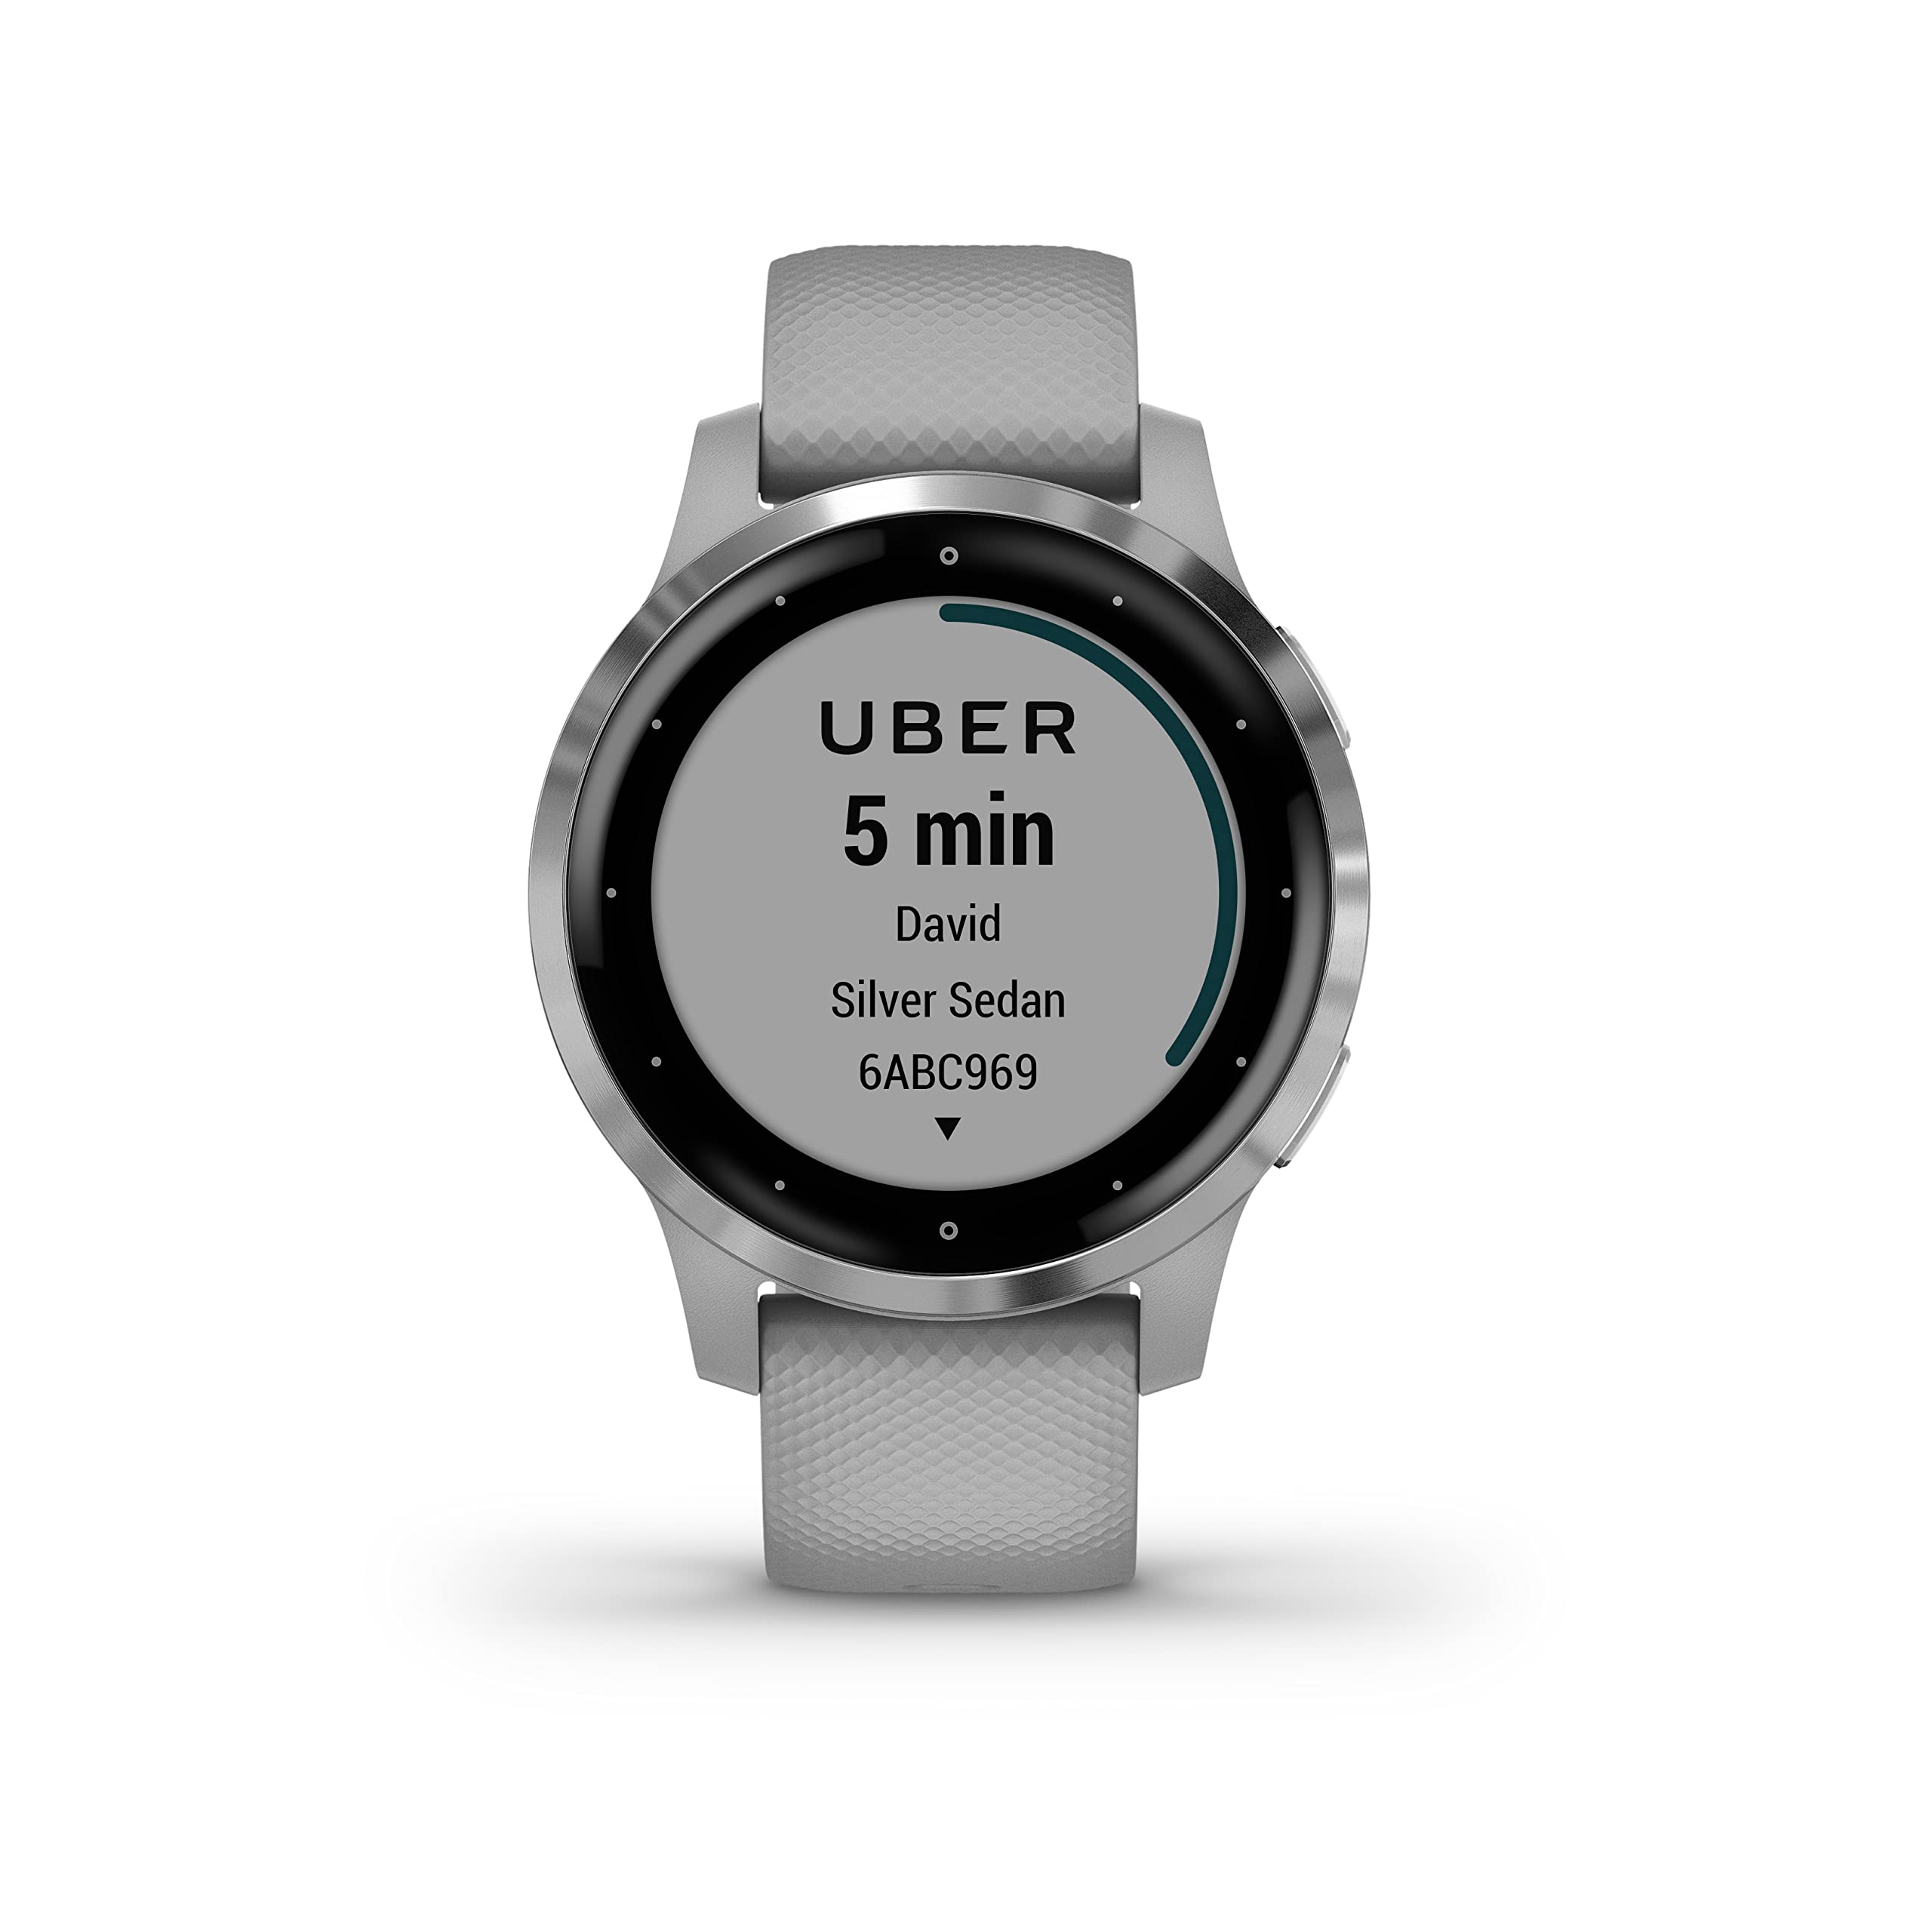 Garmin Vívoactive 4S, Smaller-Sized GPS Smartwatch, Features Music, Body Energy Monitoring, Animated Workouts, Pulse Ox Sensors and More, Powder Gray/Silver